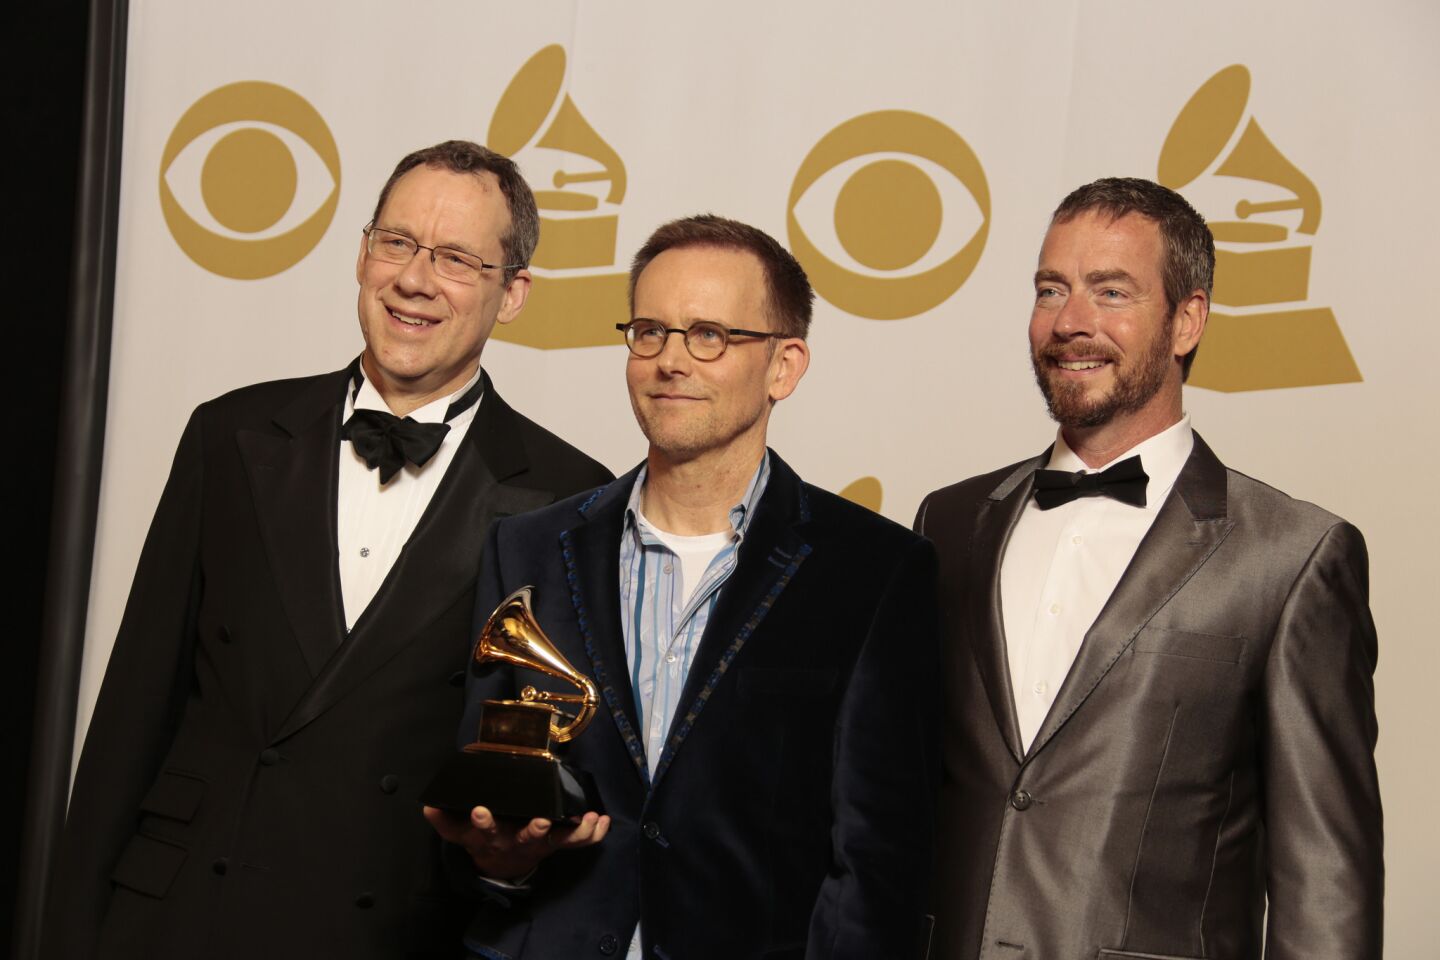 From left, singer Glenn Miller, conductor Craig Hella Johnson and singer Robert Harlan win choral performance for "The Scared Spirit of Russia."